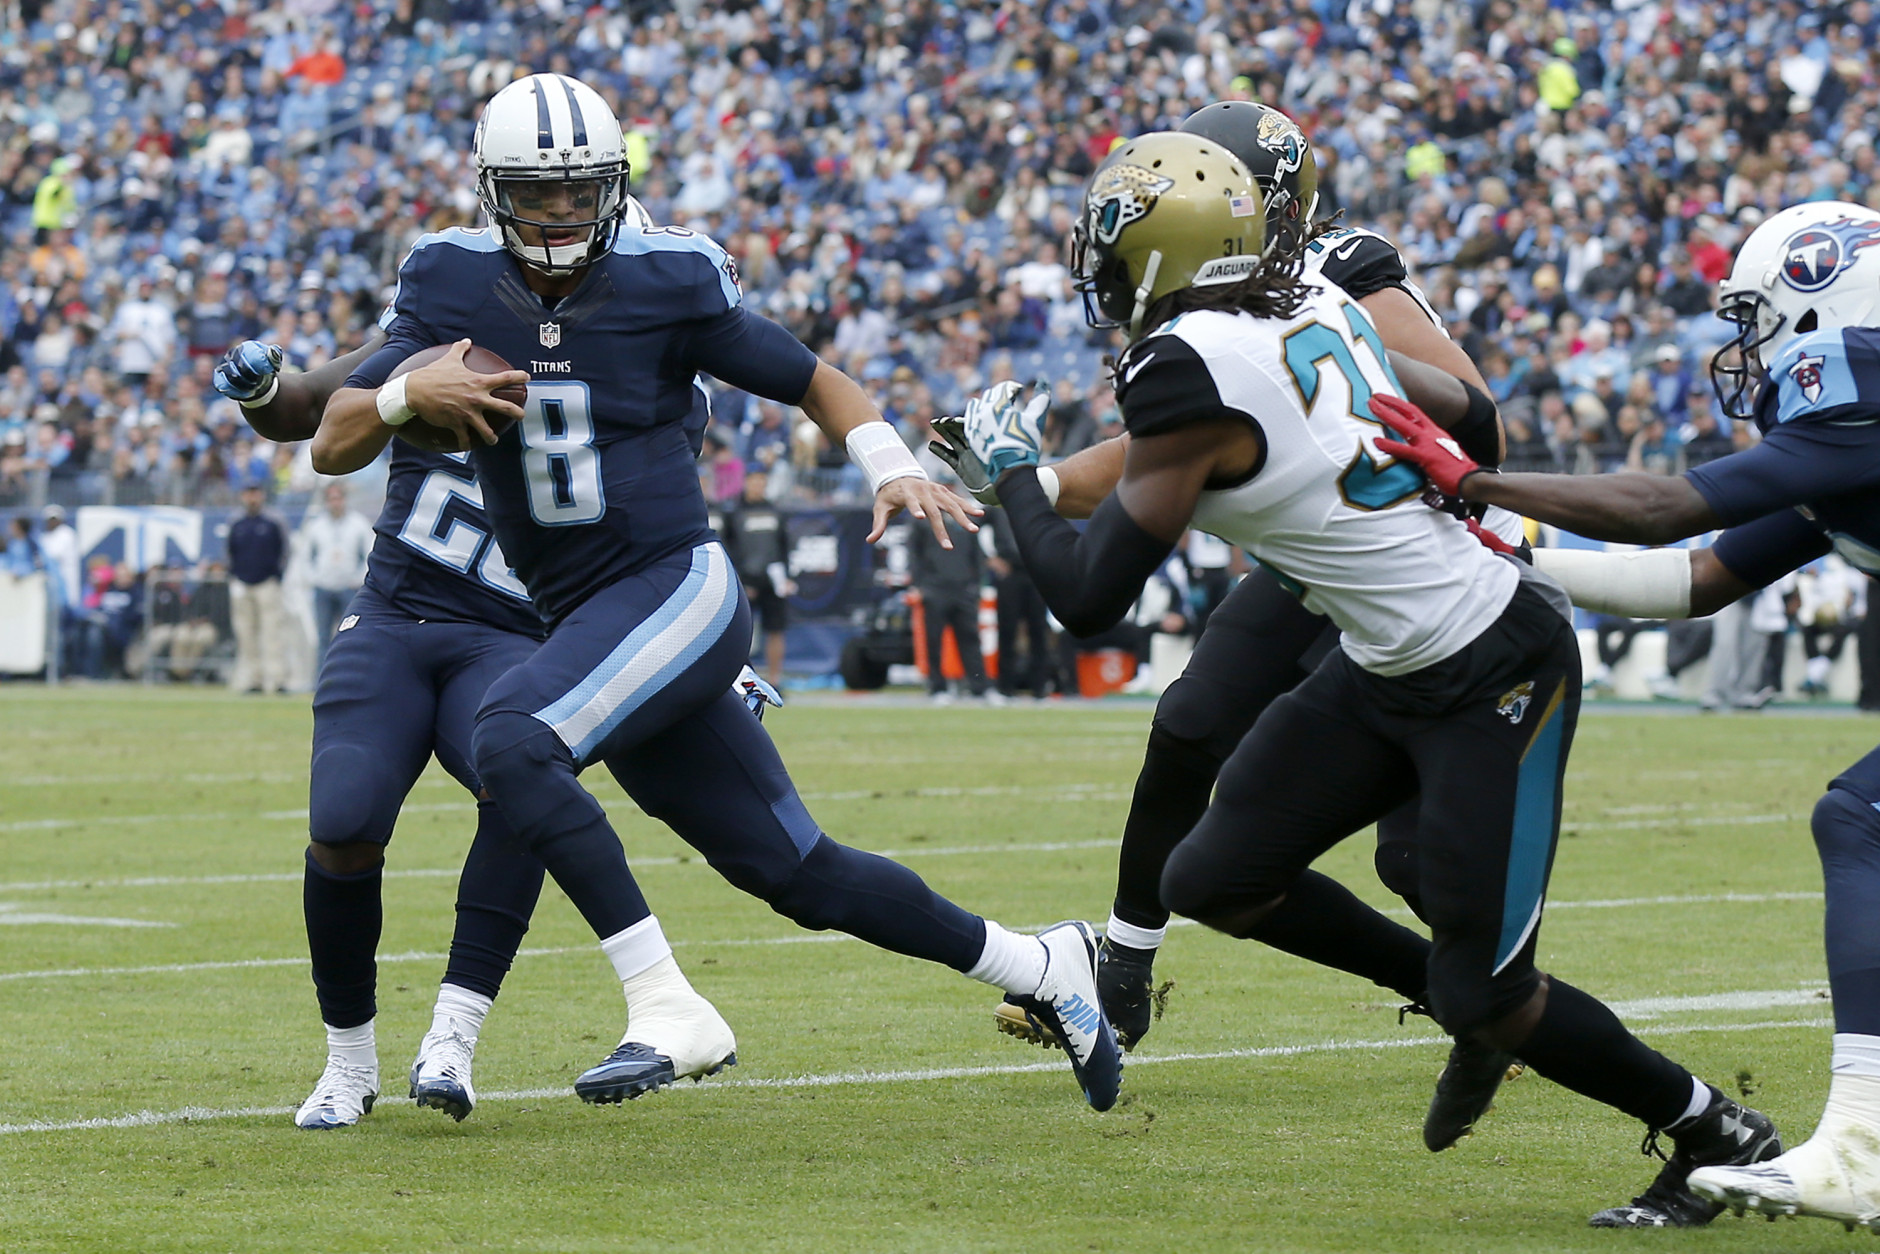 NASHVILLE, TN - DECEMBER 6:  Marcus Mariota #8 of the Tennessee Titans runs with the ball against the Jacksonville Jaguars during the game at Nissan Stadium on December 6, 2015 in Nashville, Tennessee. (Photo by Wesley Hitt/Getty Images)